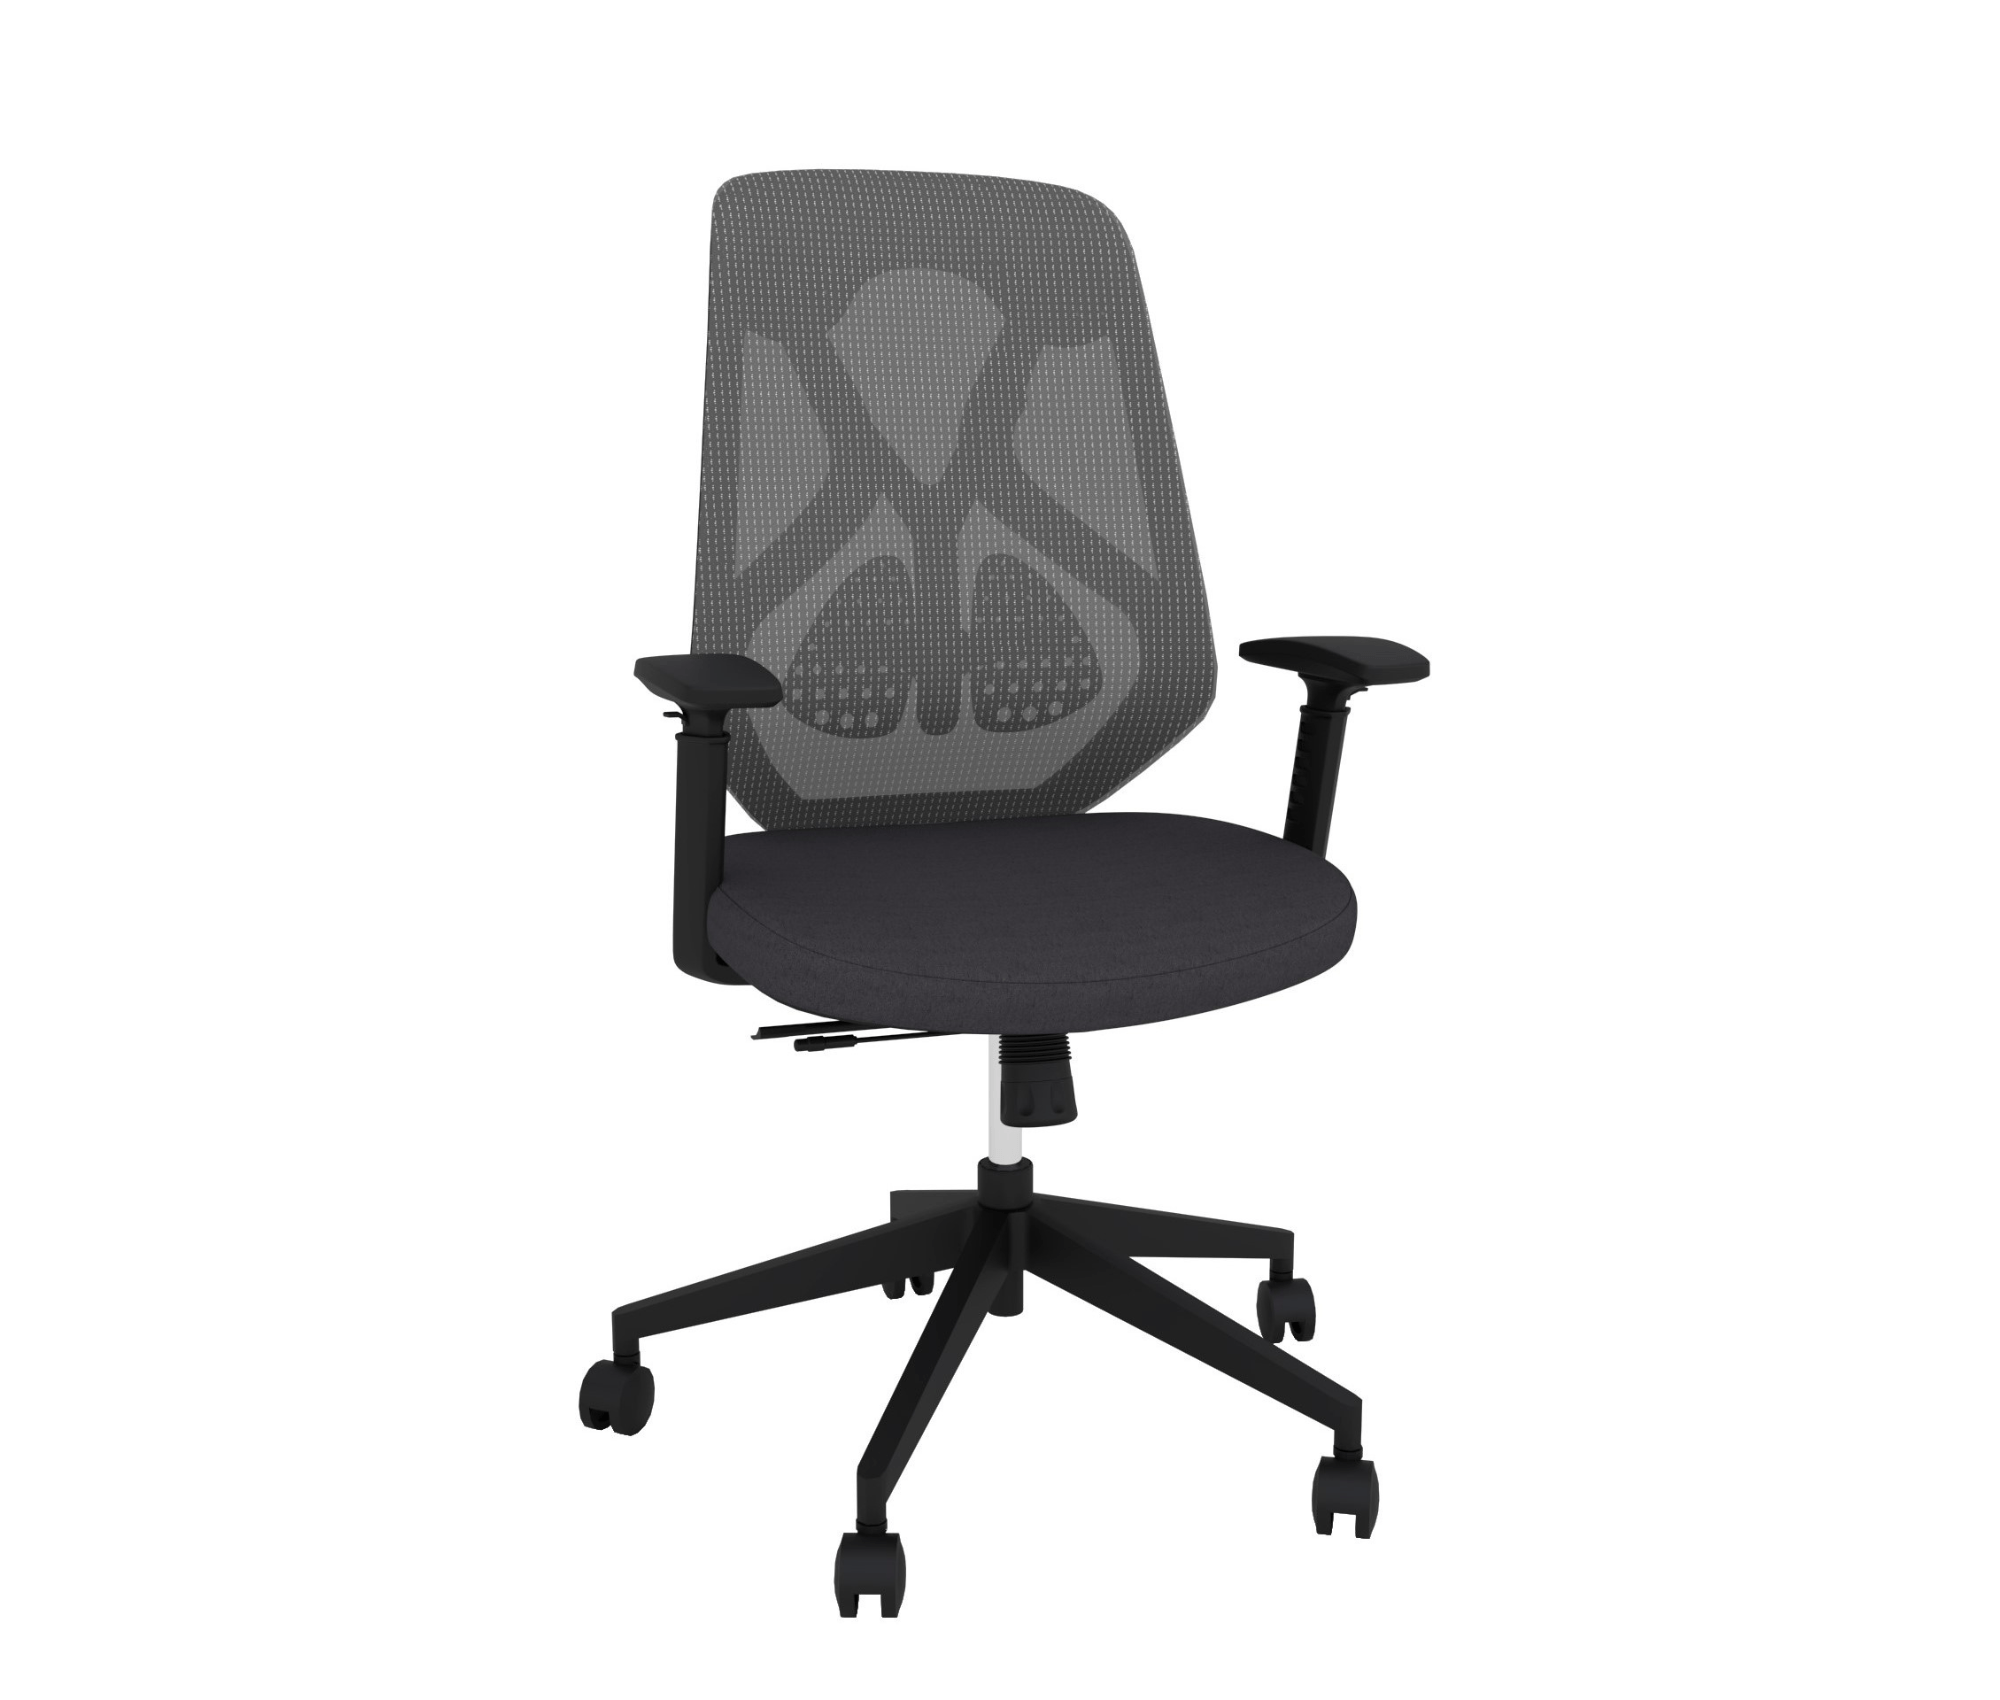 Ergonomic Chair | Office Chair with Adjustable Arms Porvata Office Chairs Smoke